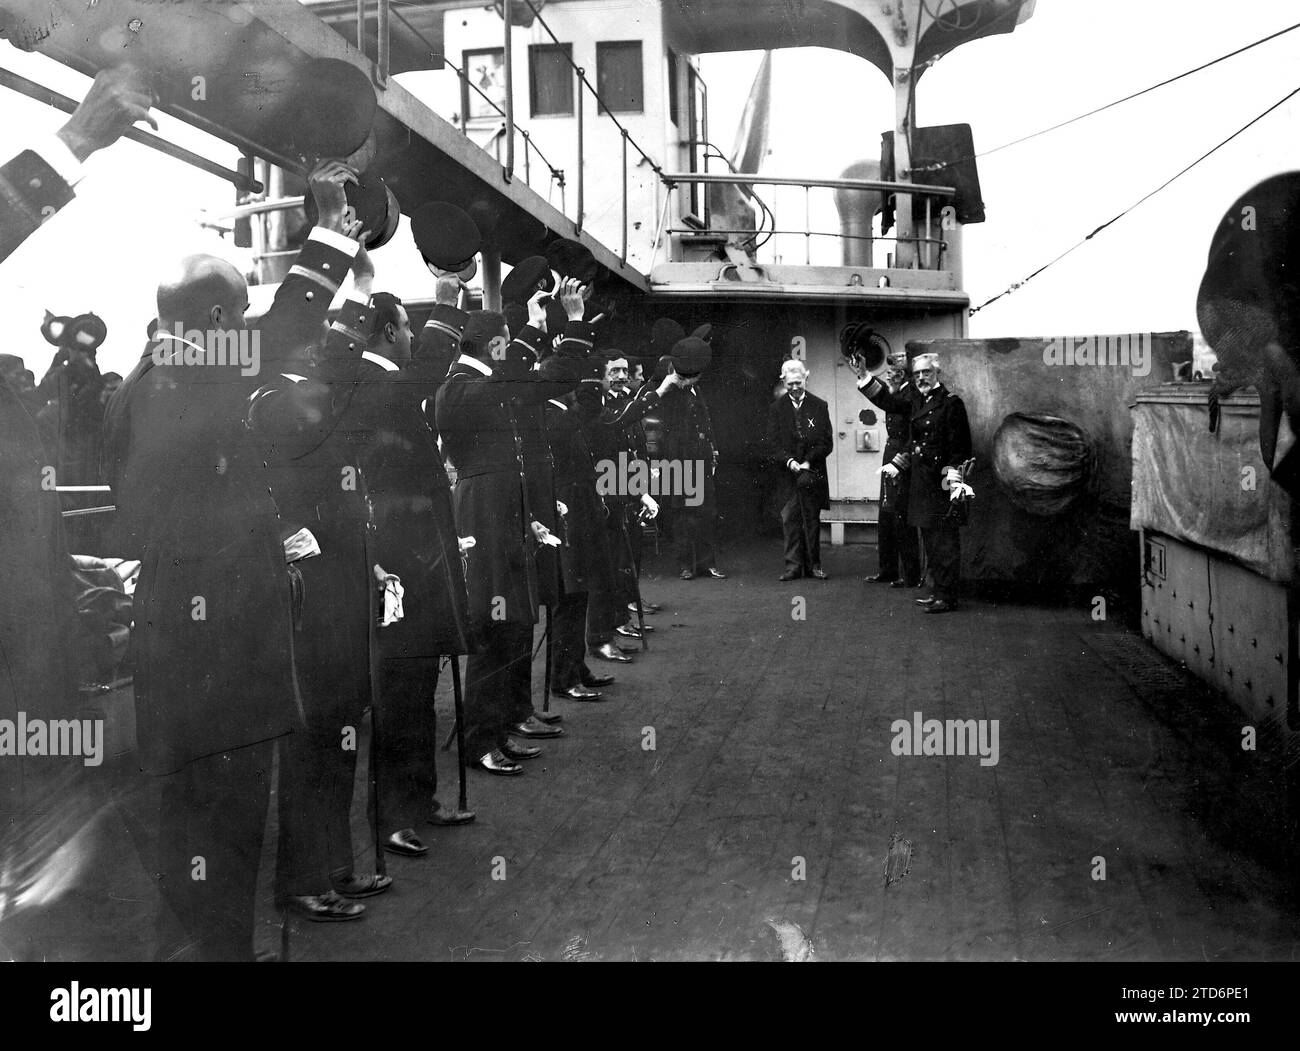 09/30/1910. The first official act of the president of the Portuguese republican government. The head of the Provisional Cabinet, Teofilo Braga, accompanied by the Minister of the Navy, Visiting the Cruise Ship 'Don Carlos' and Acclaimed by the ship's officers. Credit: Album / Archivo ABC / Ramón Alba Stock Photo